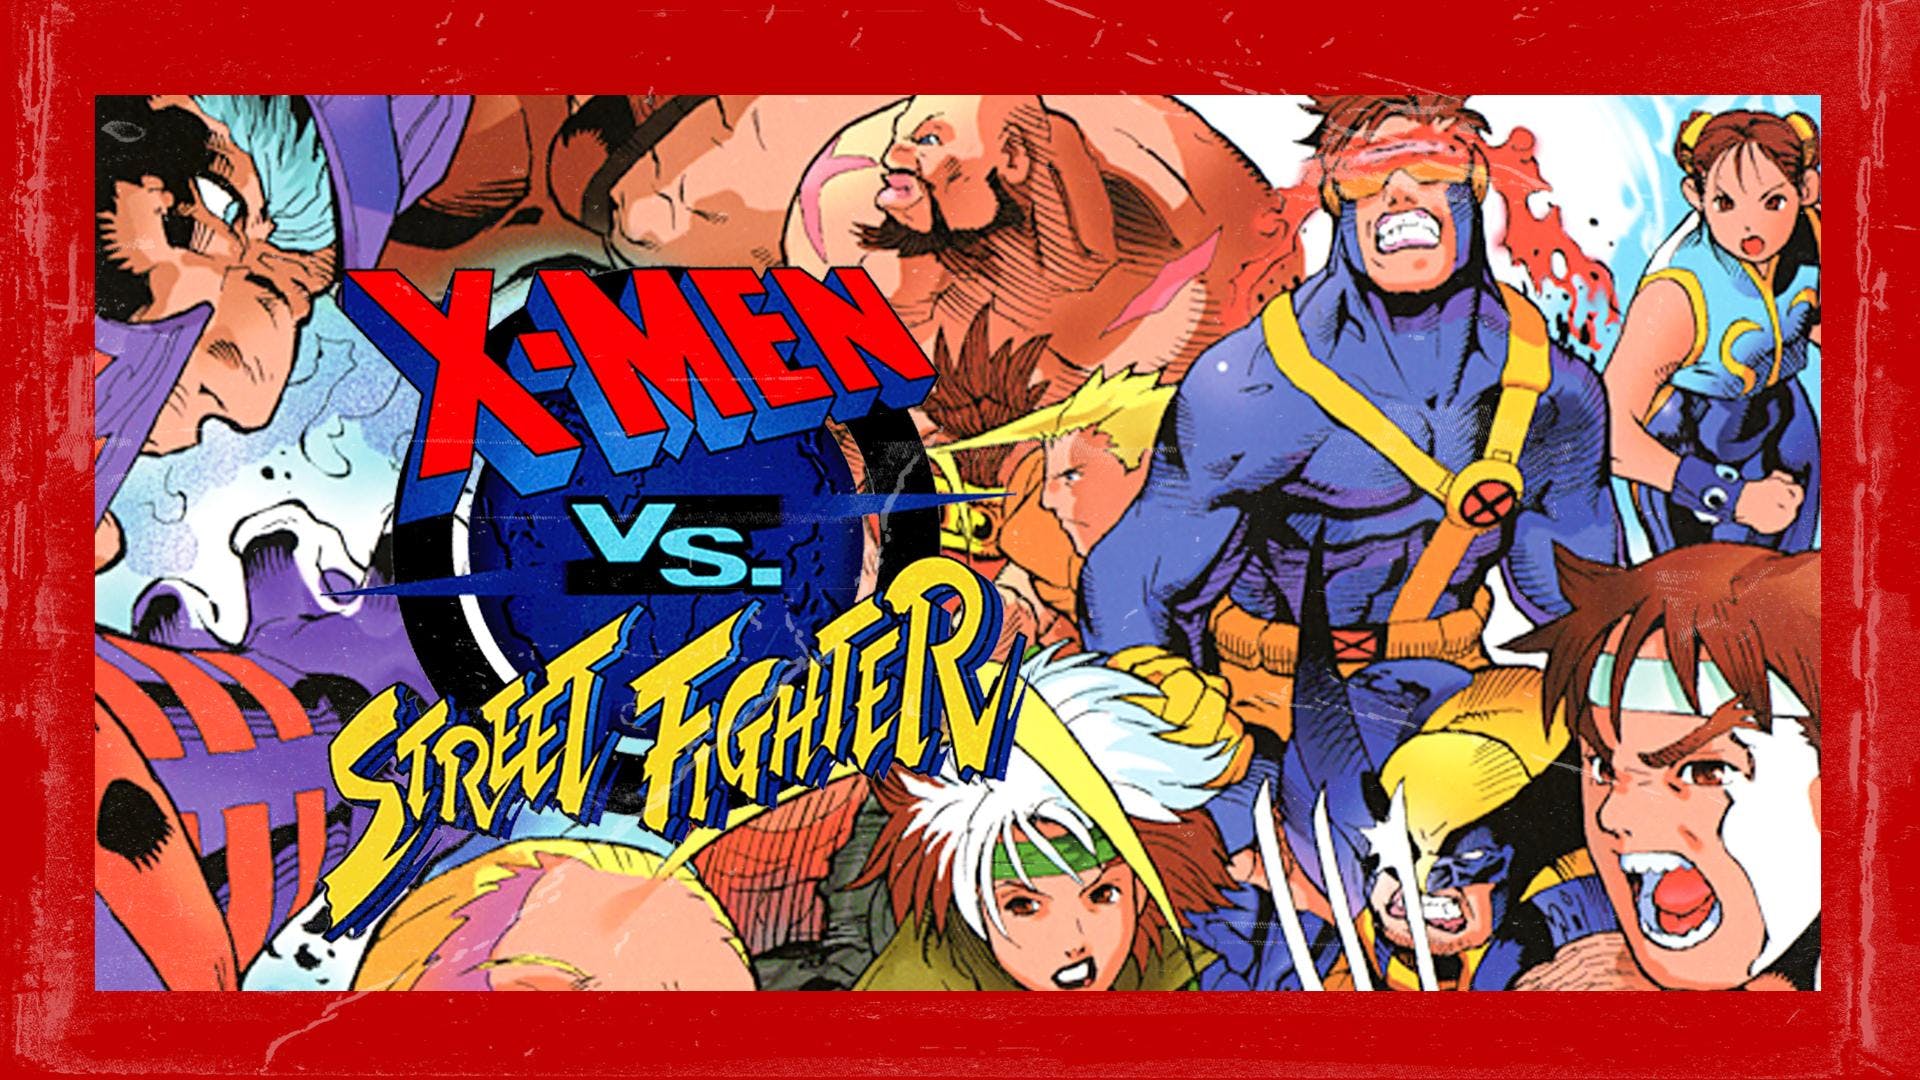 xmen vs street fighter free download for pc